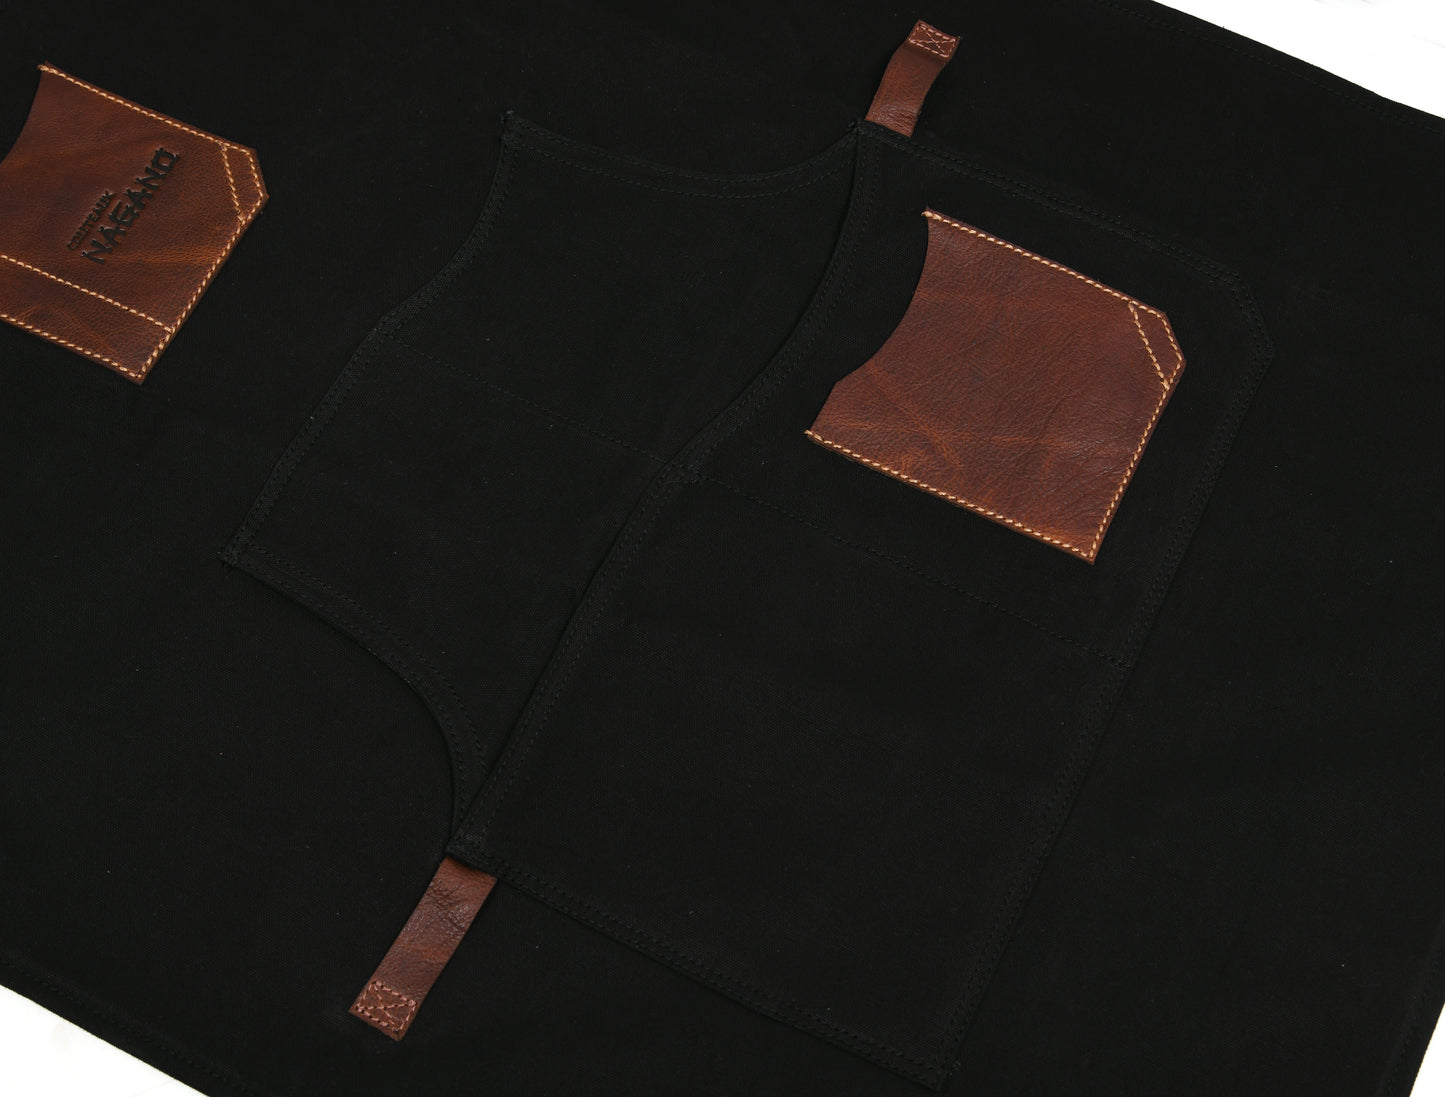 Black apron with dark brown leather